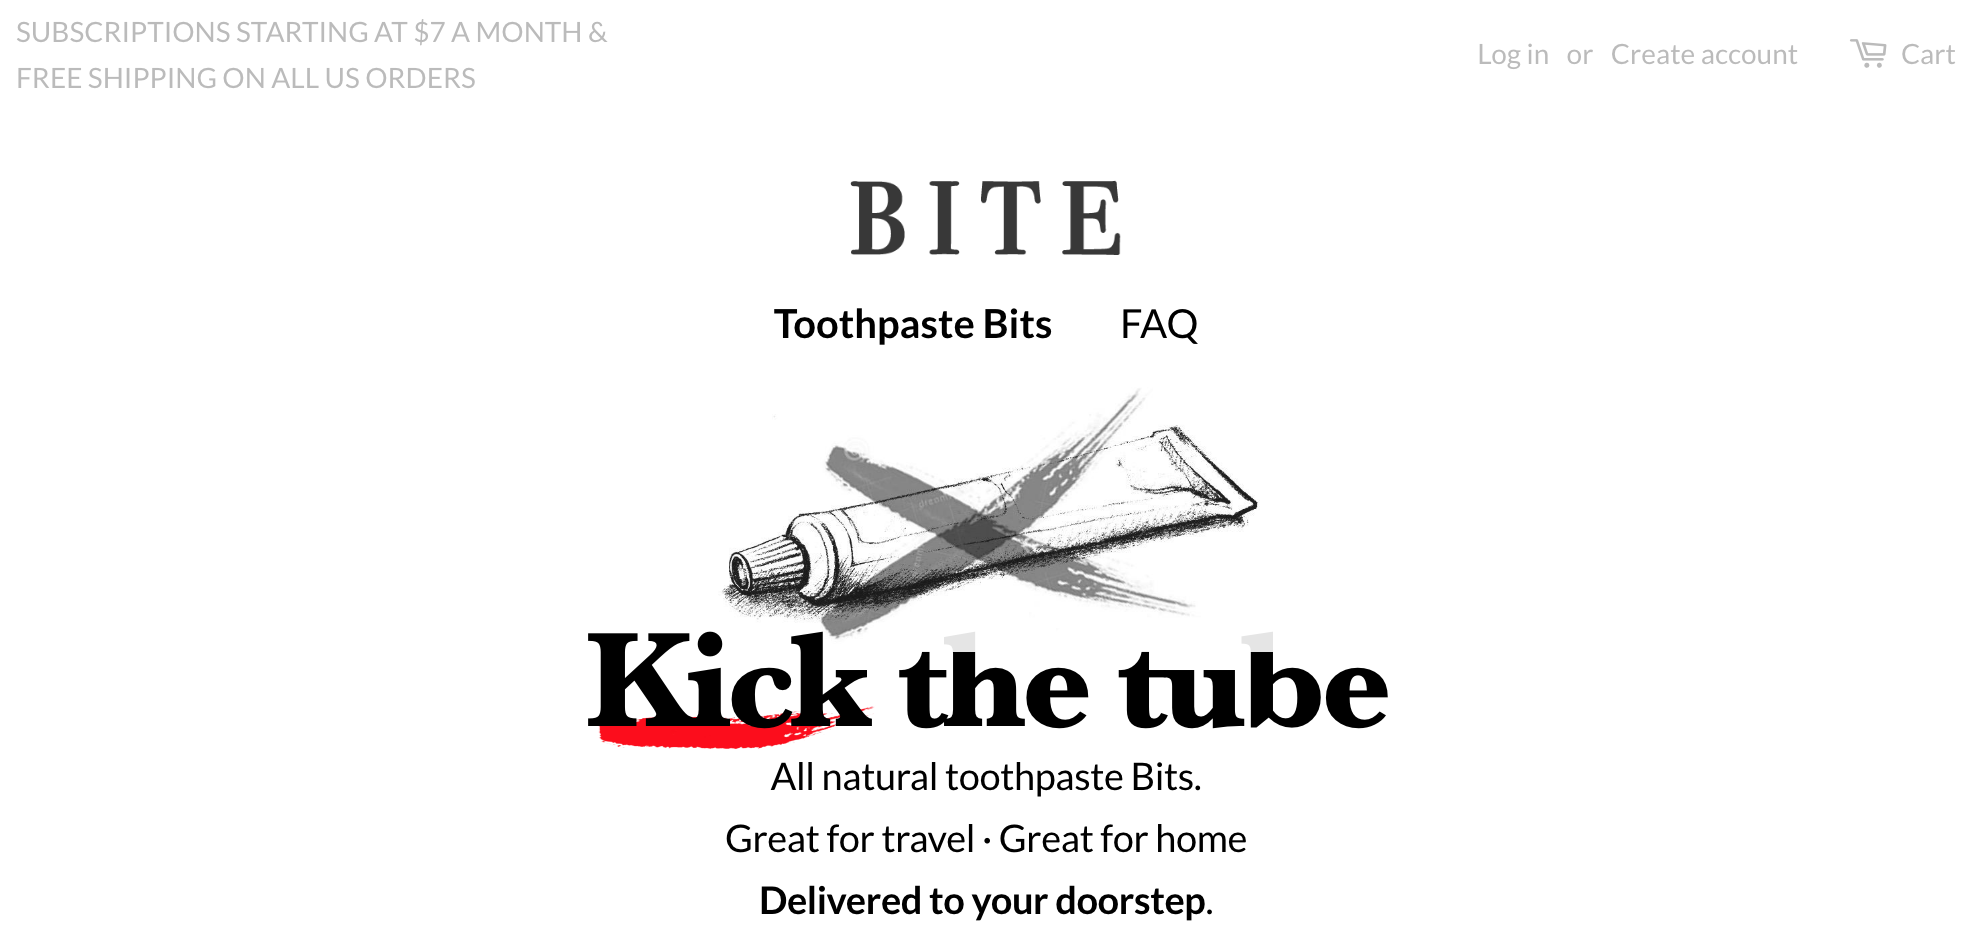 Screenshot showing a page on Bite's website